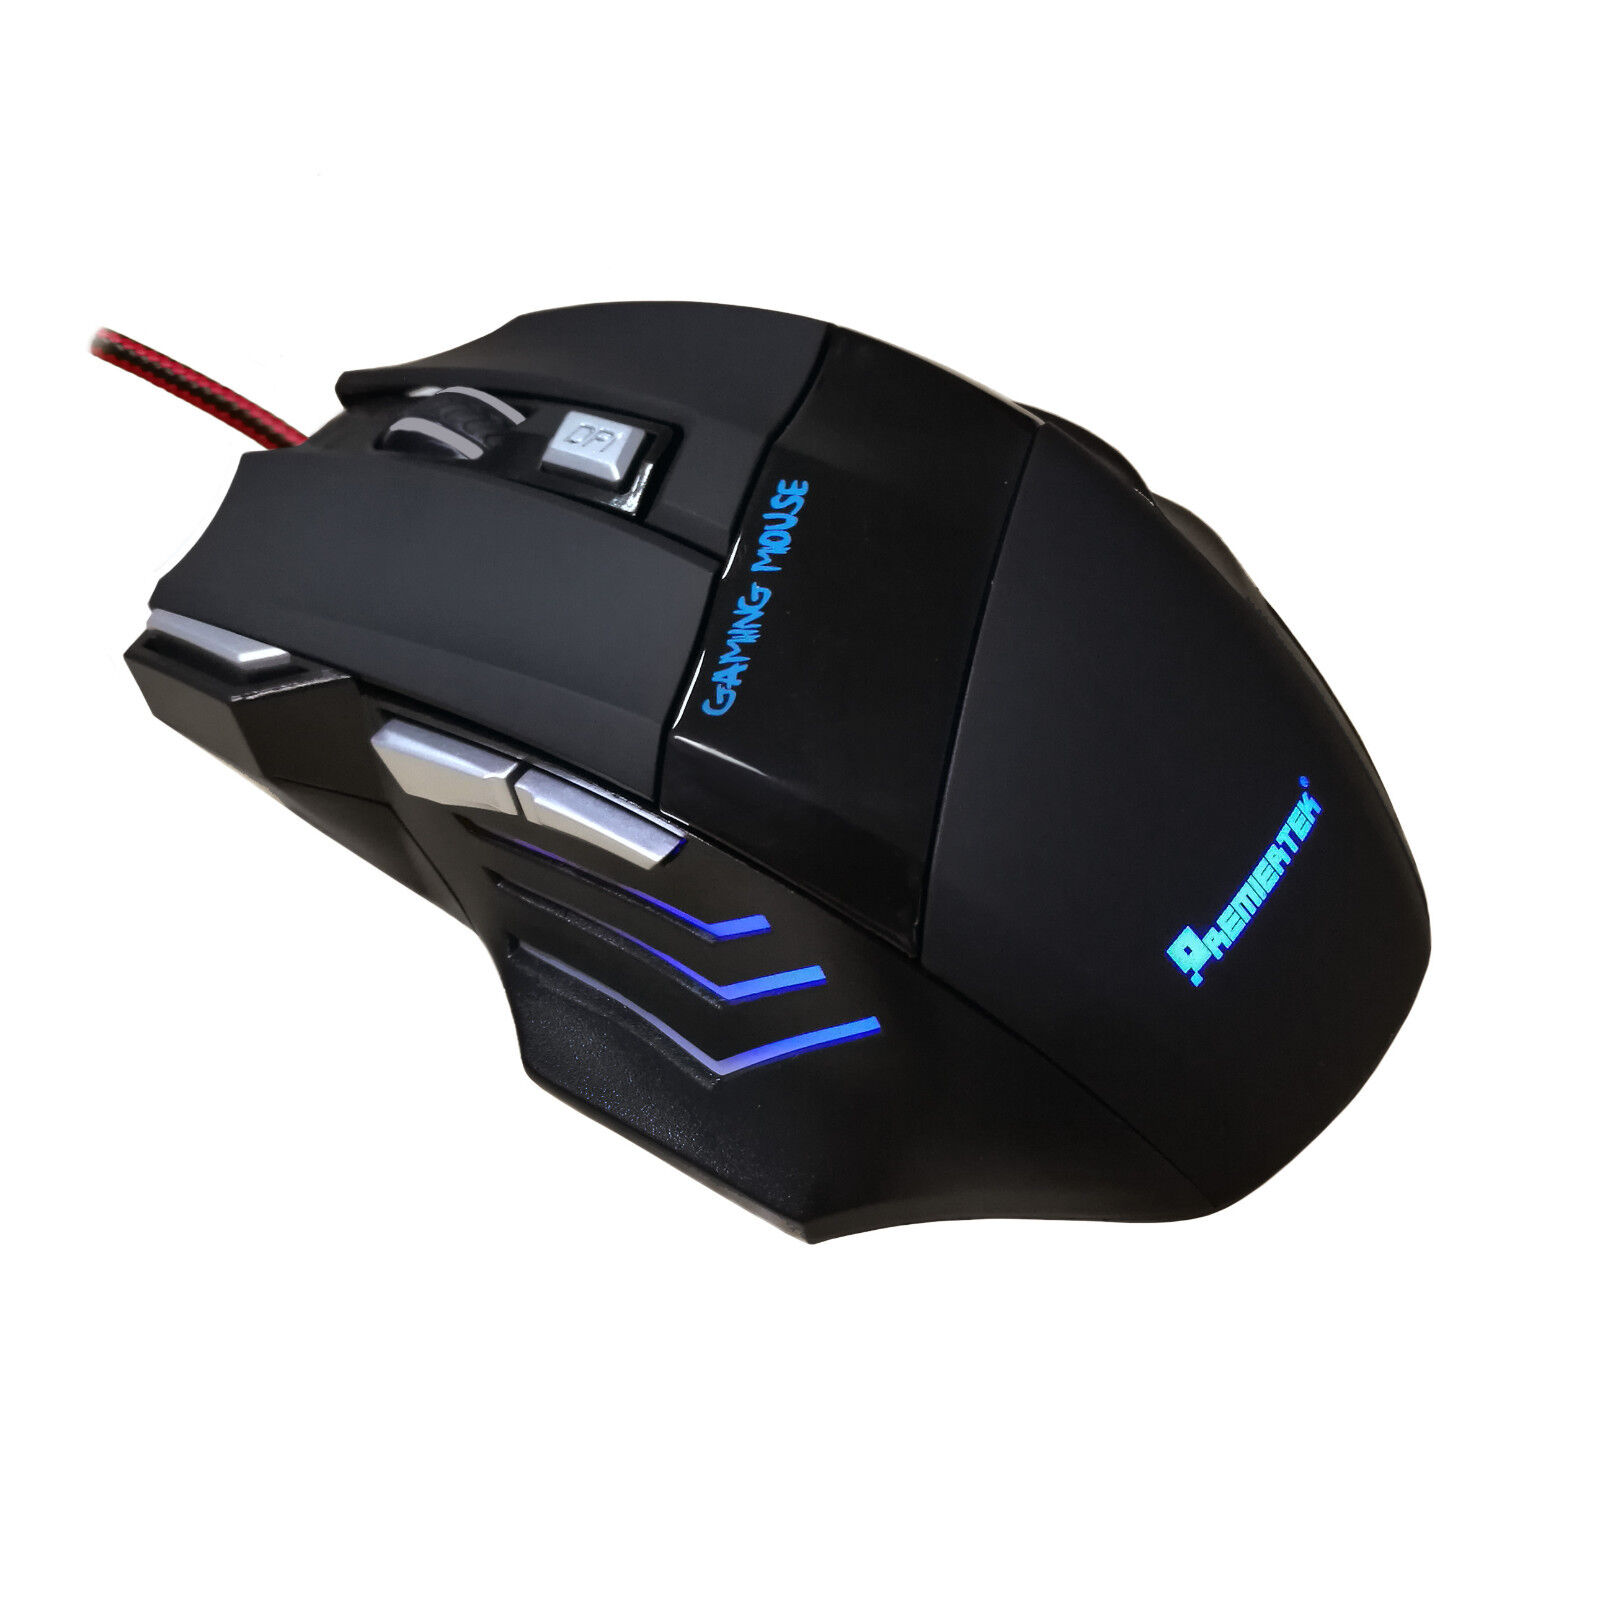 🔥Gaming Mouse 7 Button USB Wired LED Breathing Fire Button 3200 DPI Laptop PC🔥